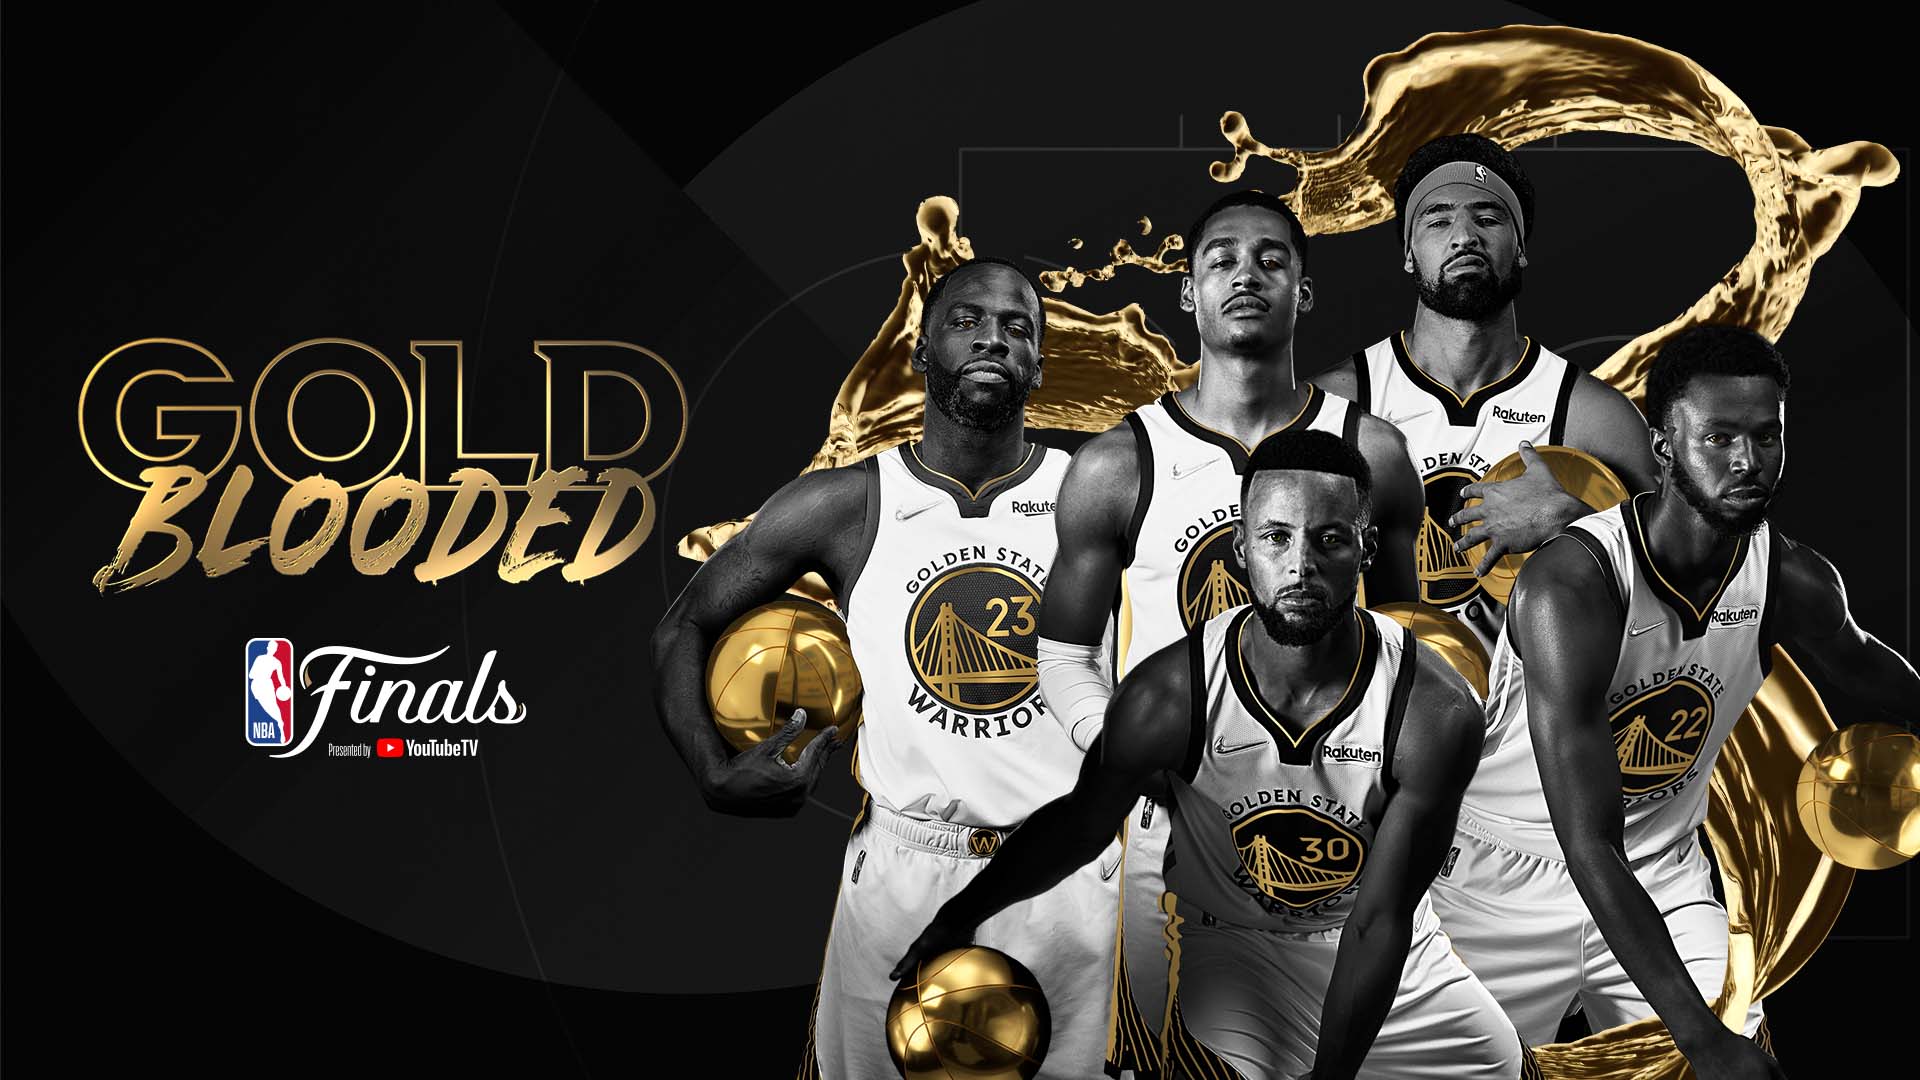 wallpaper gold blooded